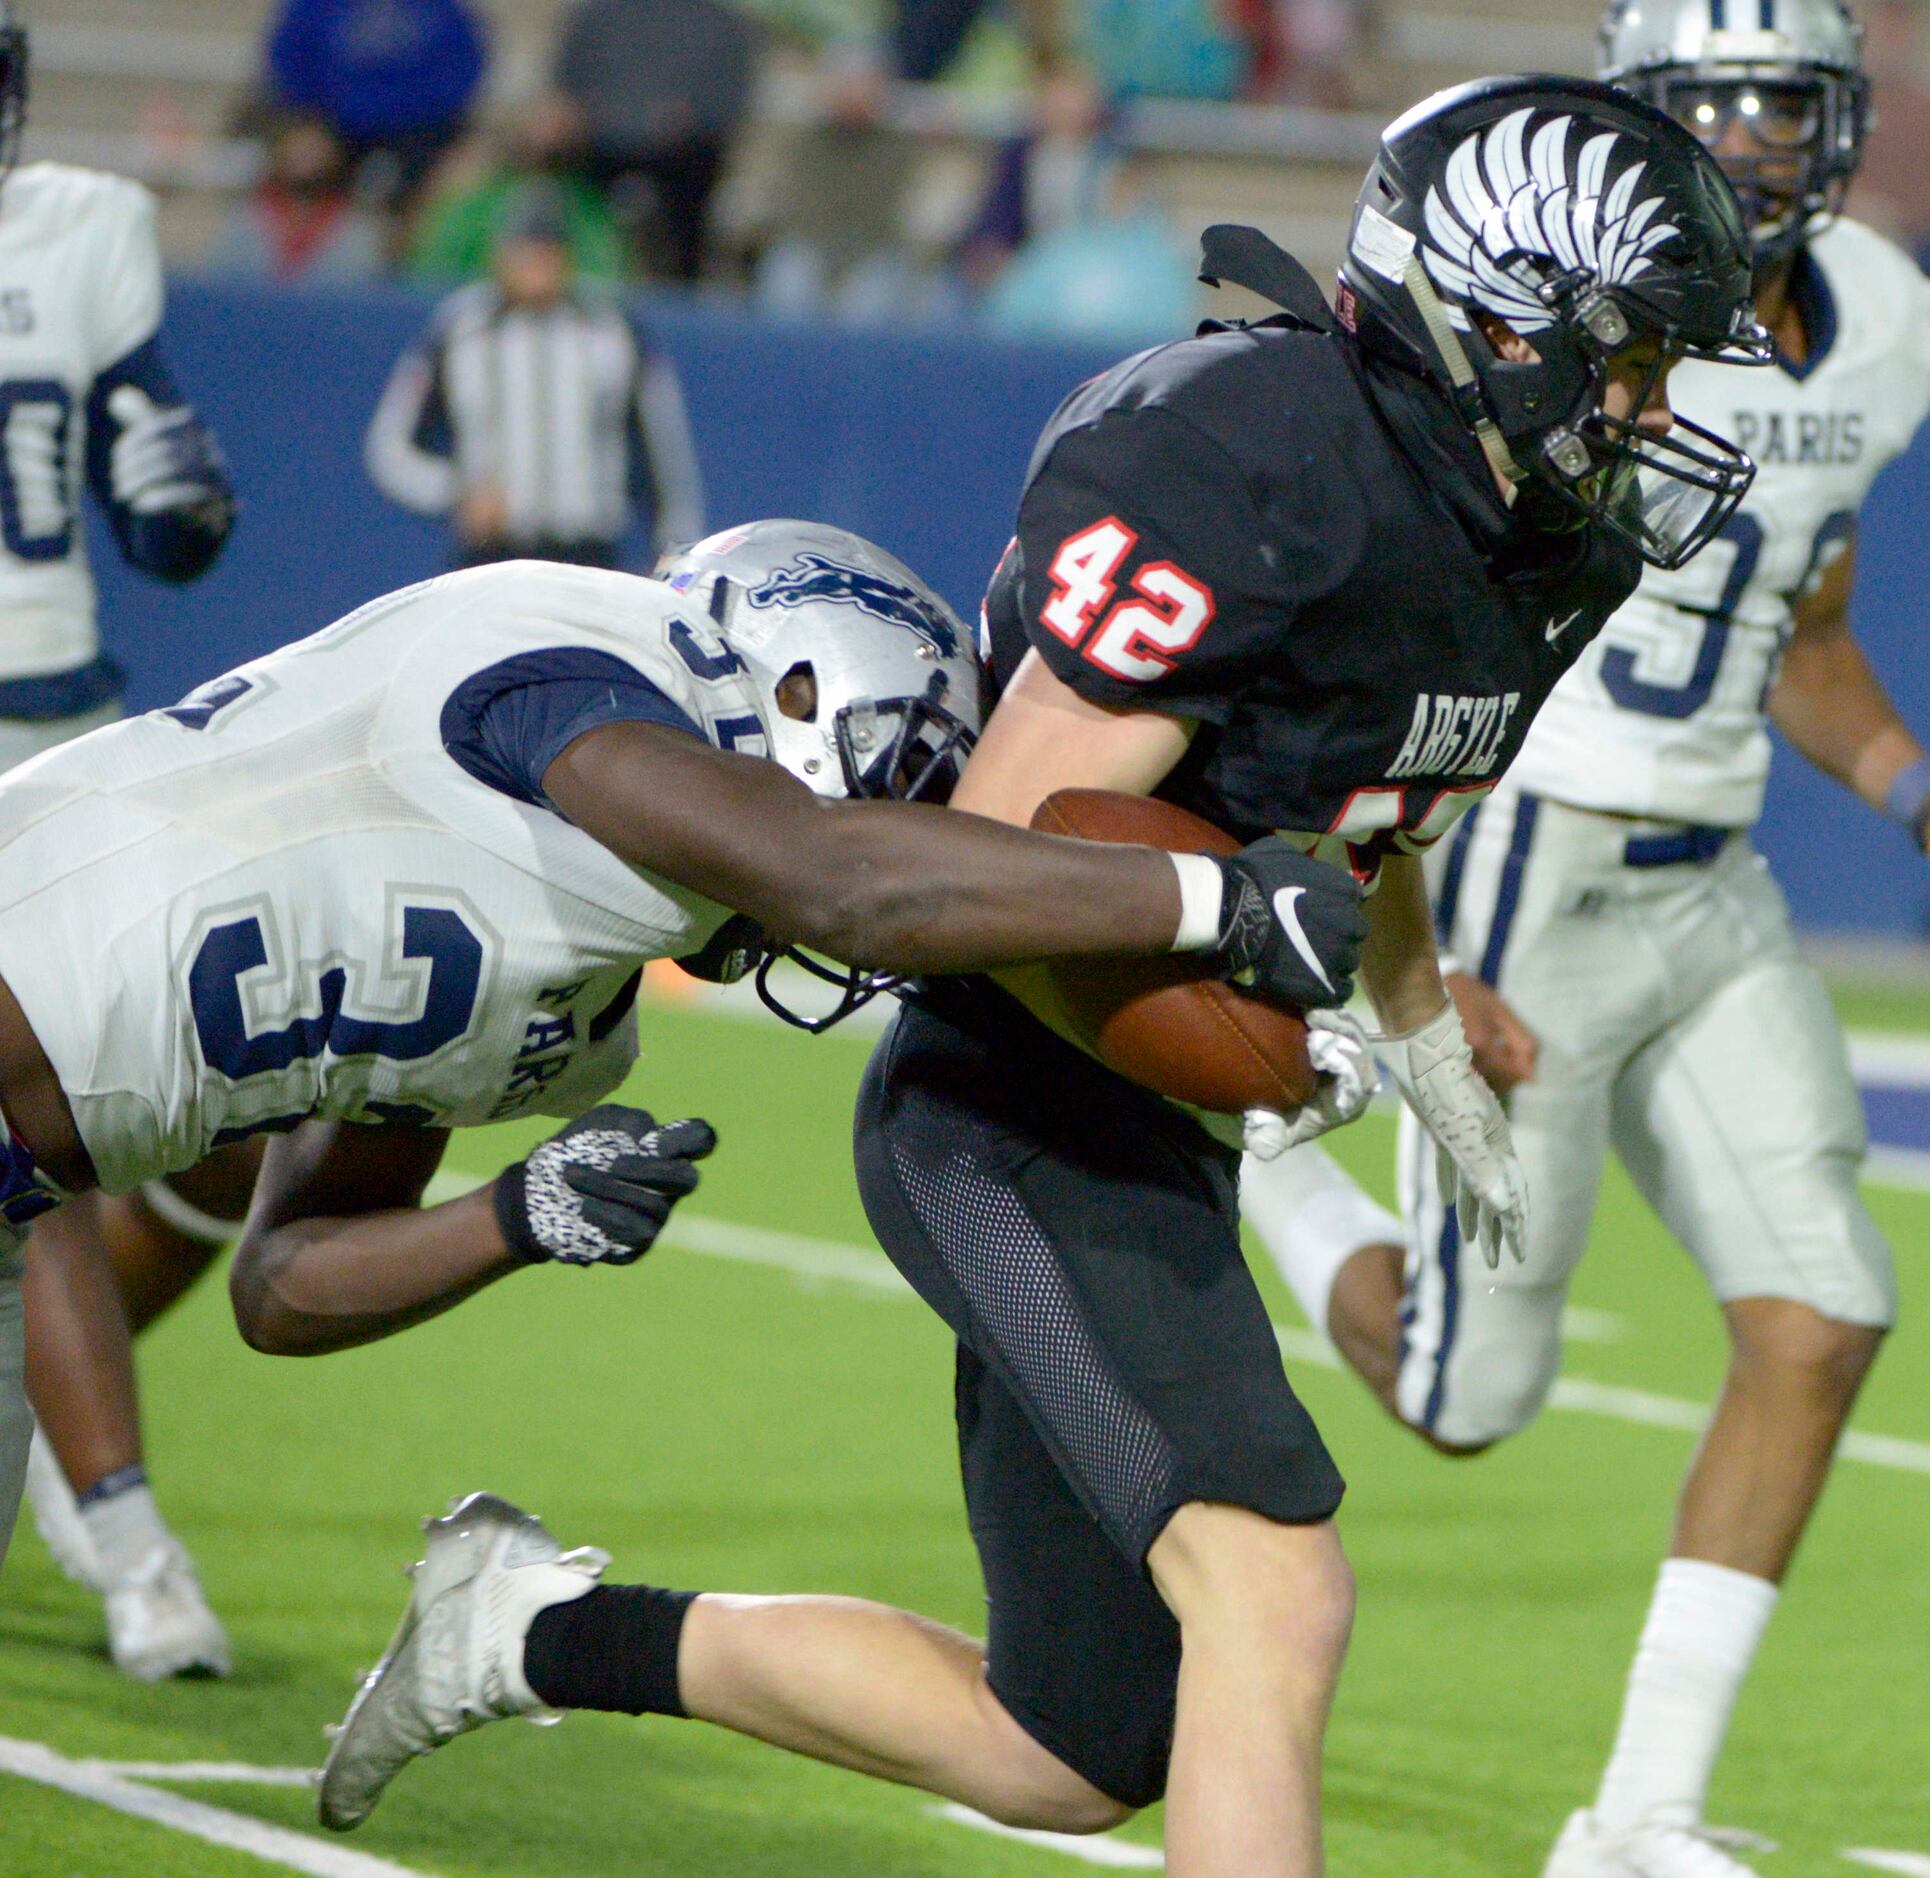 Paris’ Keshawn Wallace (32) forces a fumble on Argyle’s Peyton Shoemake (42) in the second...